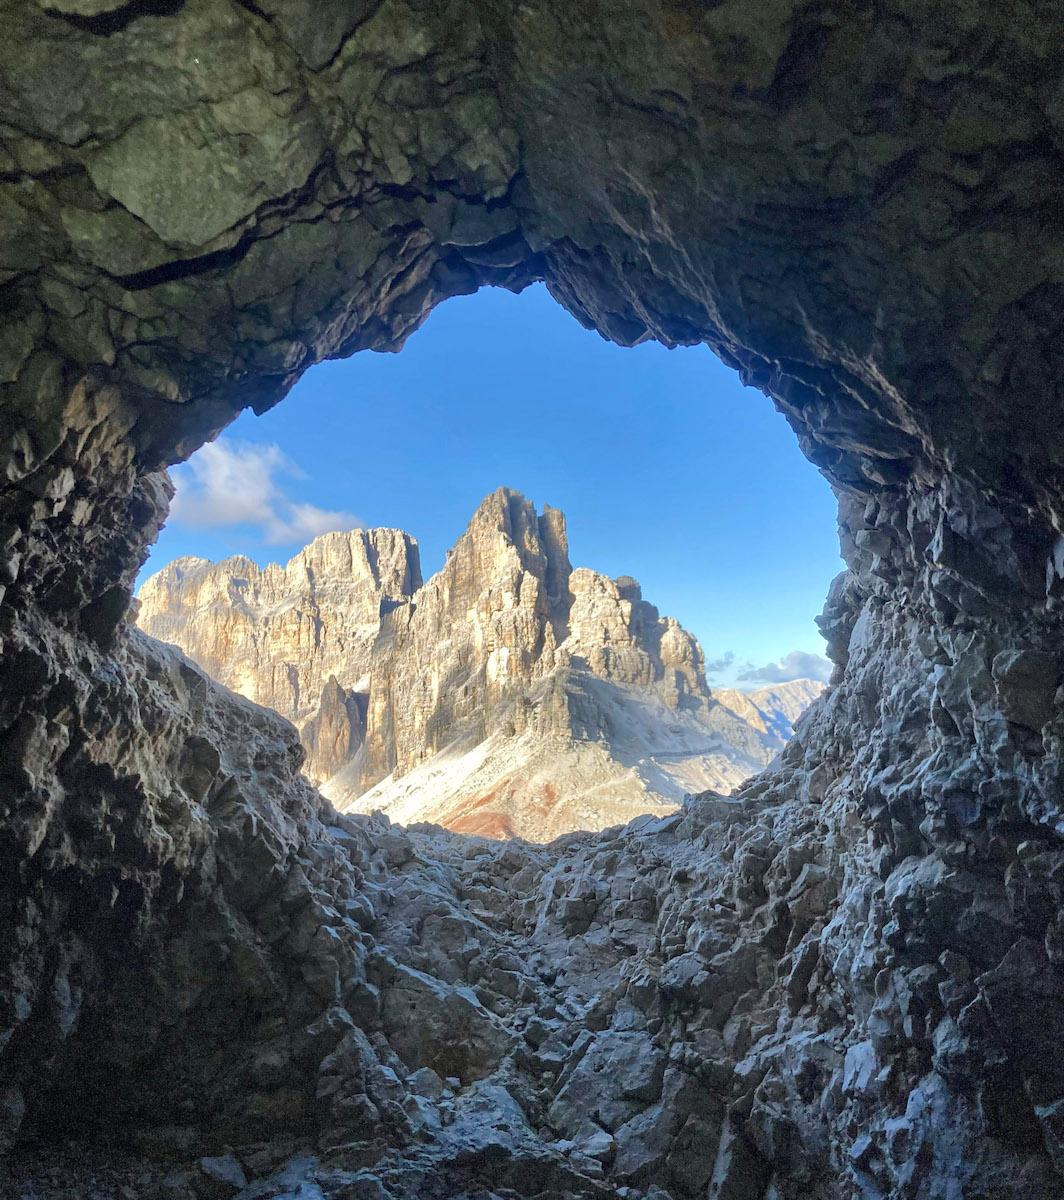 A WW1 tunnel in the Dolomites